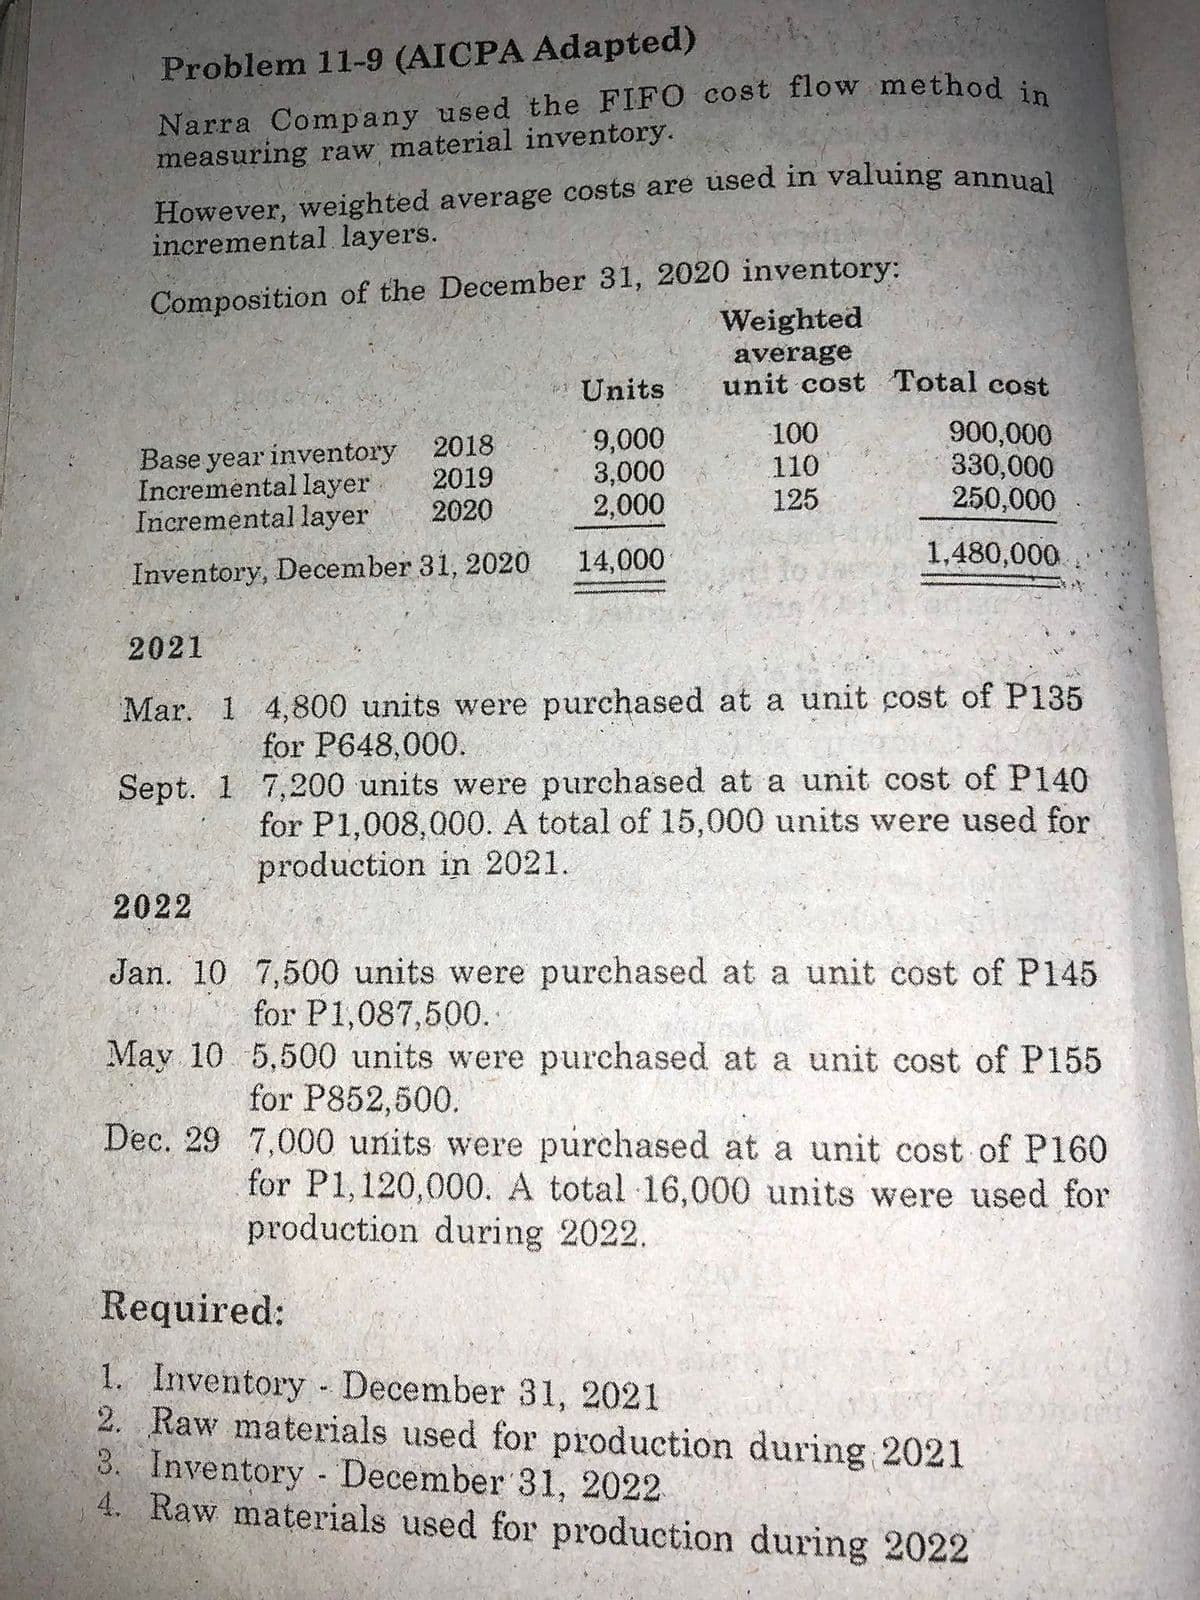 Problem 11-9 (AICPA Adapted)
Narra Company used the FIFO cost flow method i
measuring raw material inventory.
However, weighted average costs are used in valuing annual
incremental layers.
Composition of the December 31, 2020 inventory:
Weighted
average
unit cost Total cost
Units
Base year inventory
Incremental layer
Incremental layer
2018
2019
9,000
3,000
2,000
100
110
900,000
330,000
250,000
2020
125
14,000
1,480,000
Inventory, December 31, 2020
2021
Mar. 1 4,800 units were purchased at a unit cost of P135
for P648,000.
Sept. 1 7,200 units were purchased at a unit cost of P140
for P1,008,000. A total of 15,000 units were used for
production in 2021.
2022
Jan. 10 7,500 units were purchased at a unit cost of P145
for P1,087,500.
May 10 5,500 units were purchased at a unit cost of P155
for P852,500.
Dec. 29 7,000 units were purchased at a unit cost of P160
for P1,120,000. A total 16,000 units were used for
production during 2022.
Required:
1. Inventory December 31, 2021
2. Raw materials used for production during 2021
3. Inventory - December 31, 2022
4. Raw materials used for production during 2022
